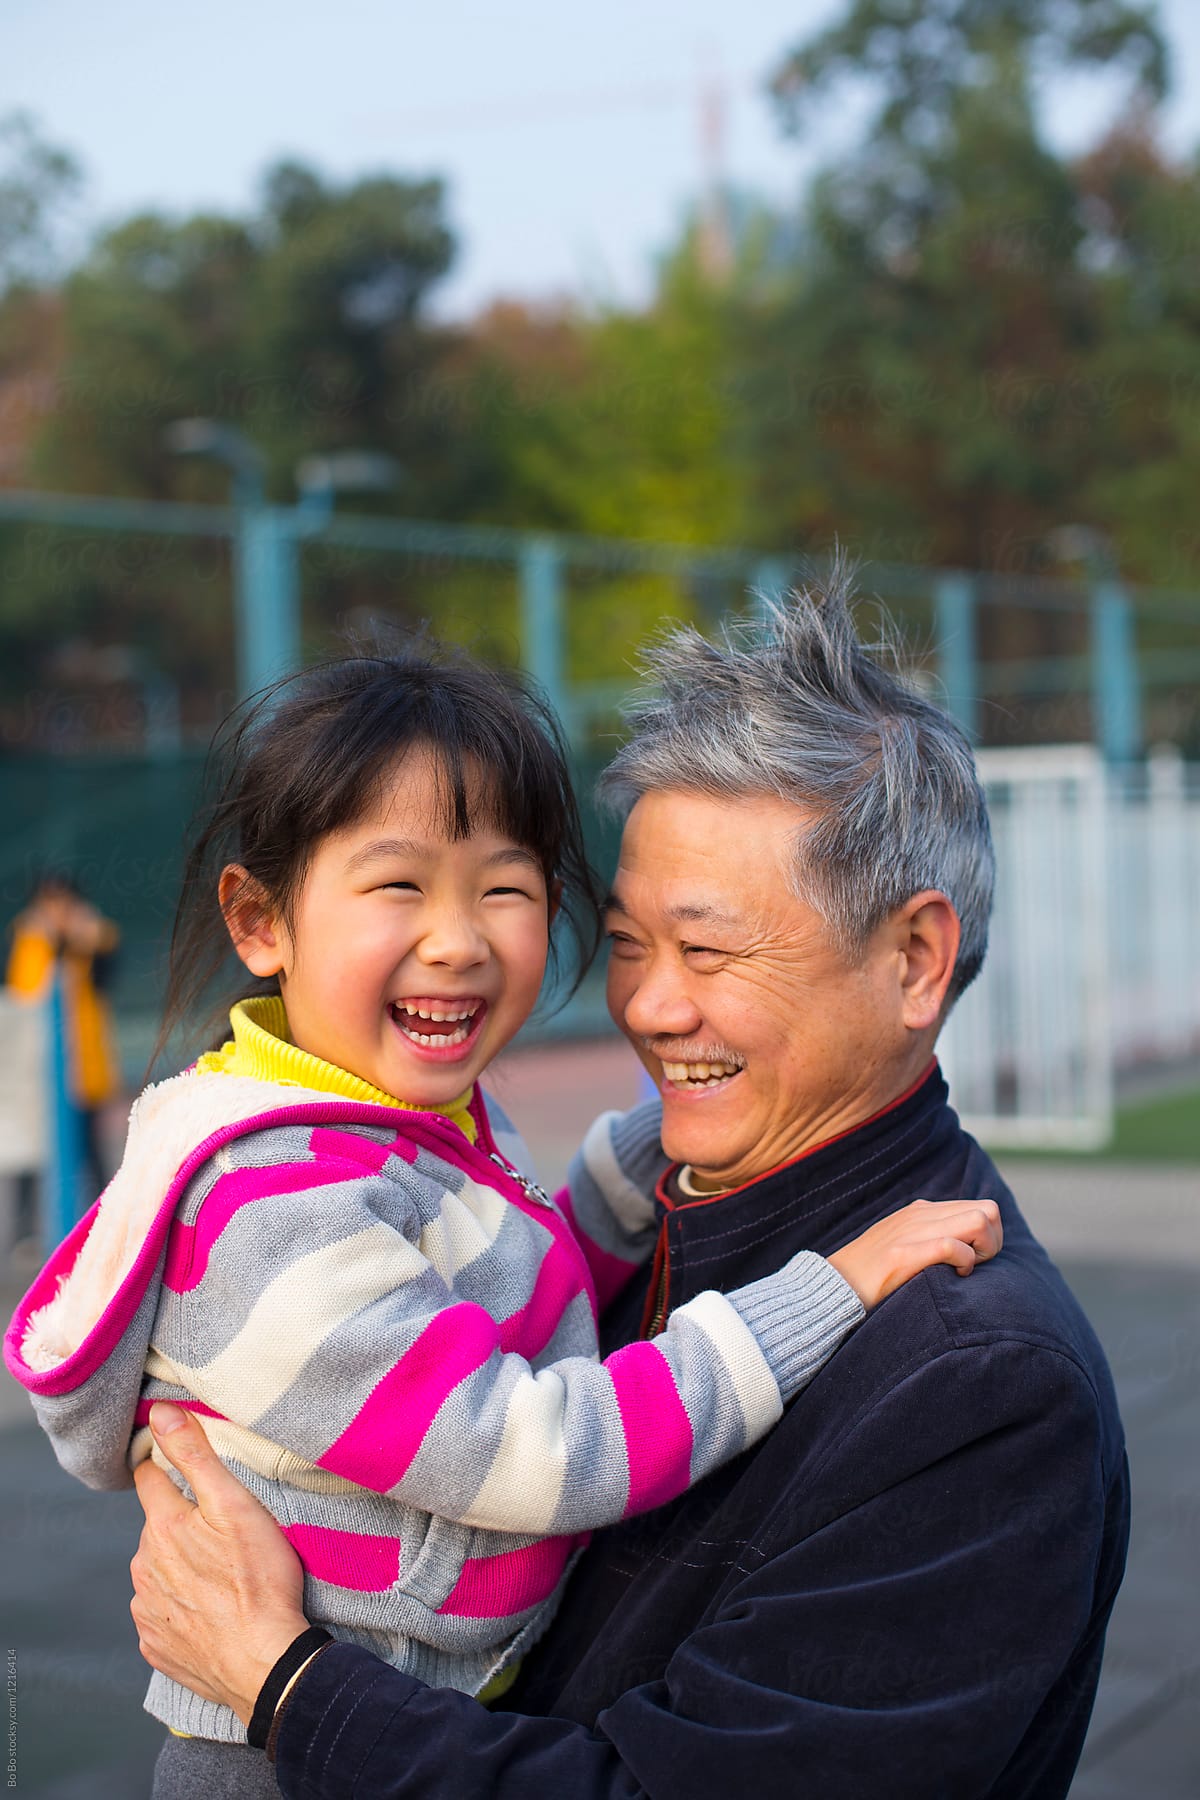 Senior Chinese Man Holding his Granddaughter Smile outdoor